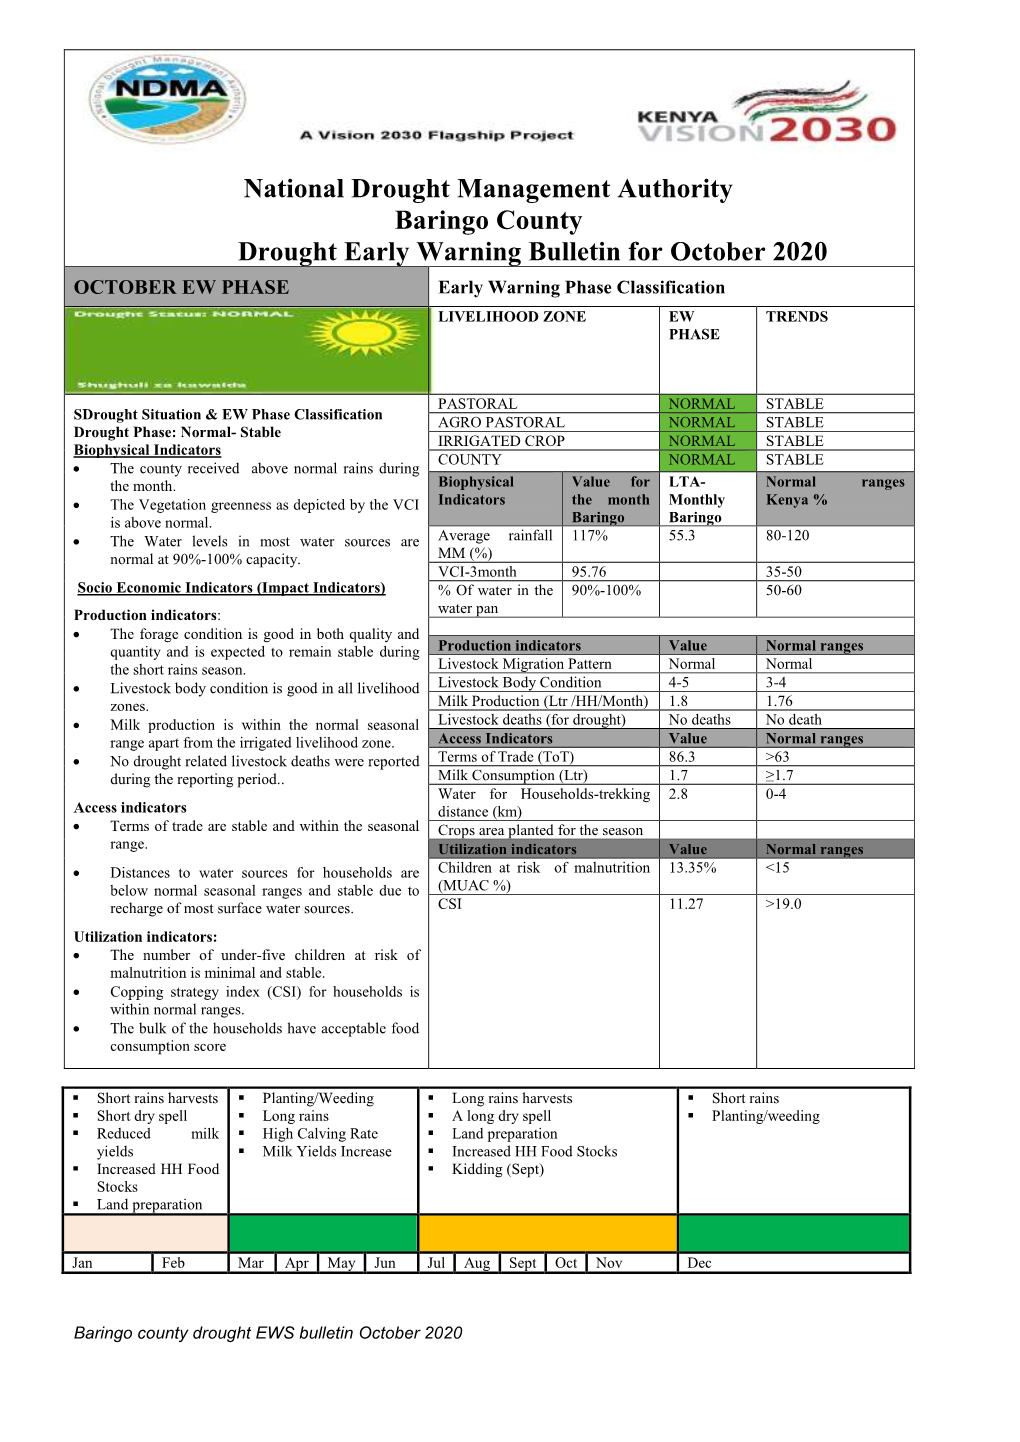 National Drought Management Authority Baringo County Drought Early Warning Bulletin for October 2020